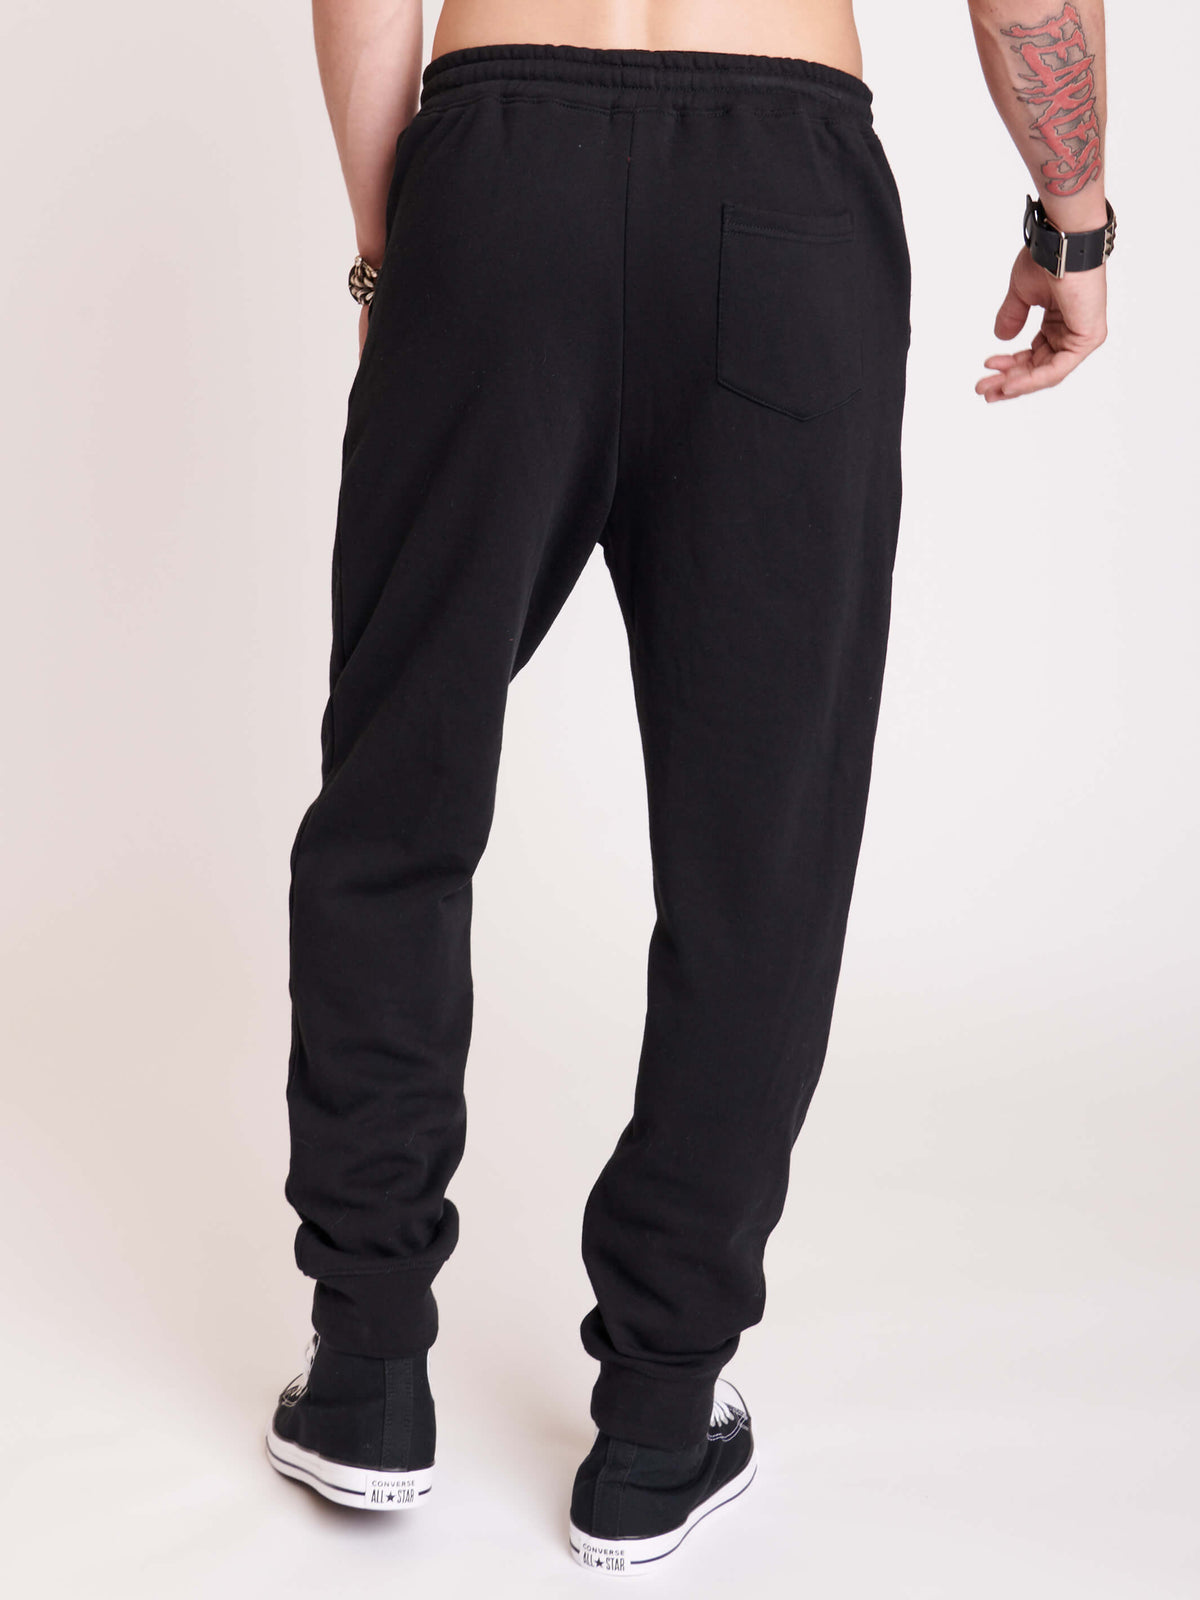 Black joggers with white dagger graphic from thighs to shins